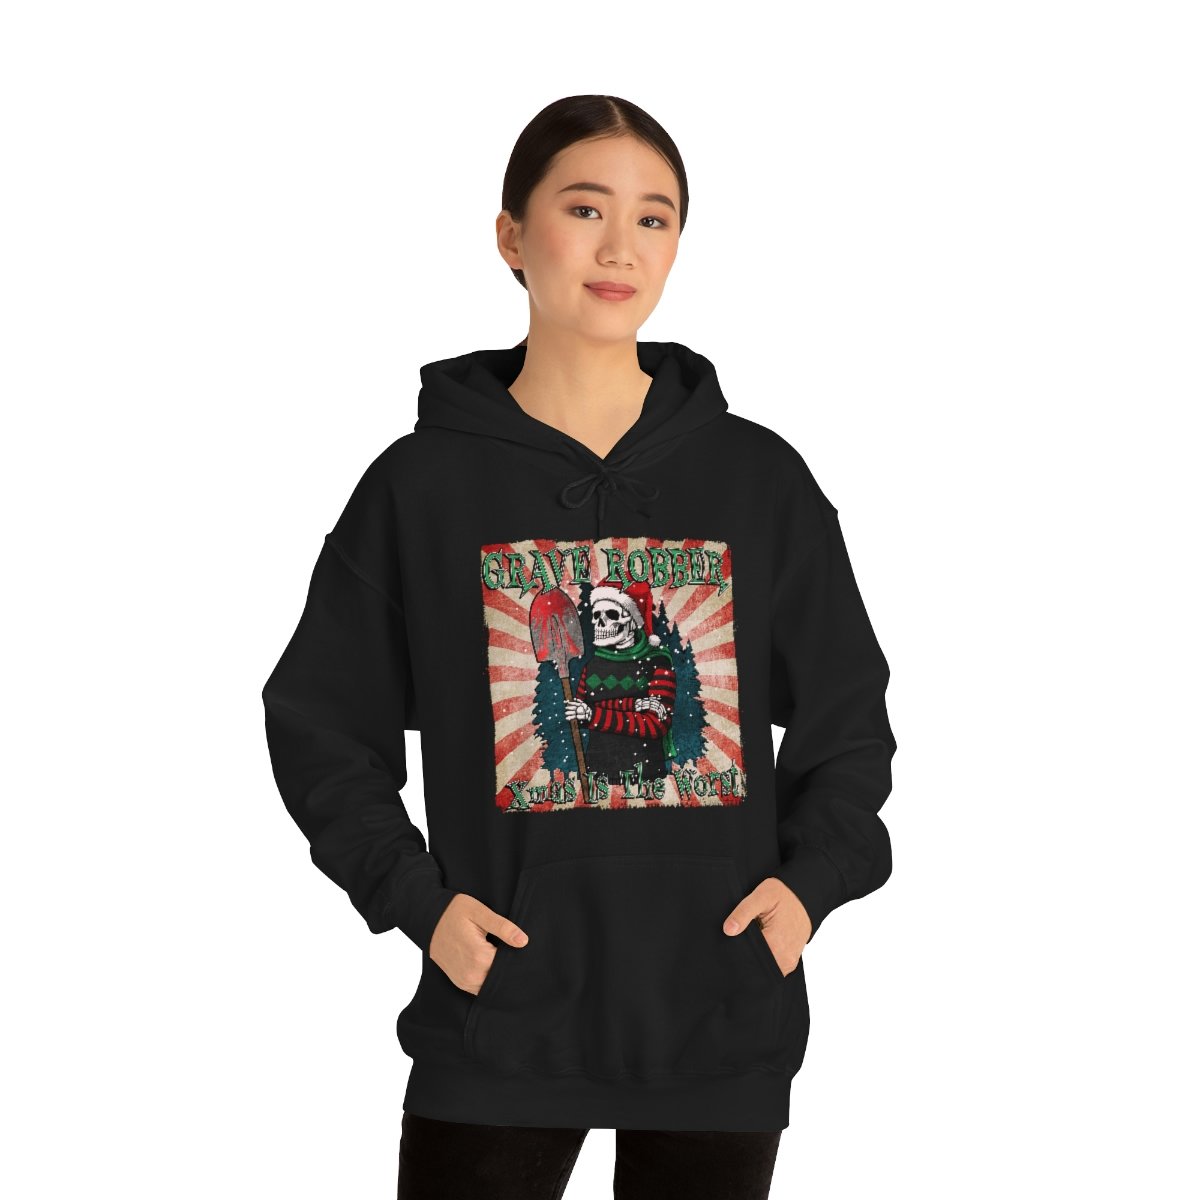 Grave Robber – Xmas Is The Worst Pullover Hooded Sweatshirt